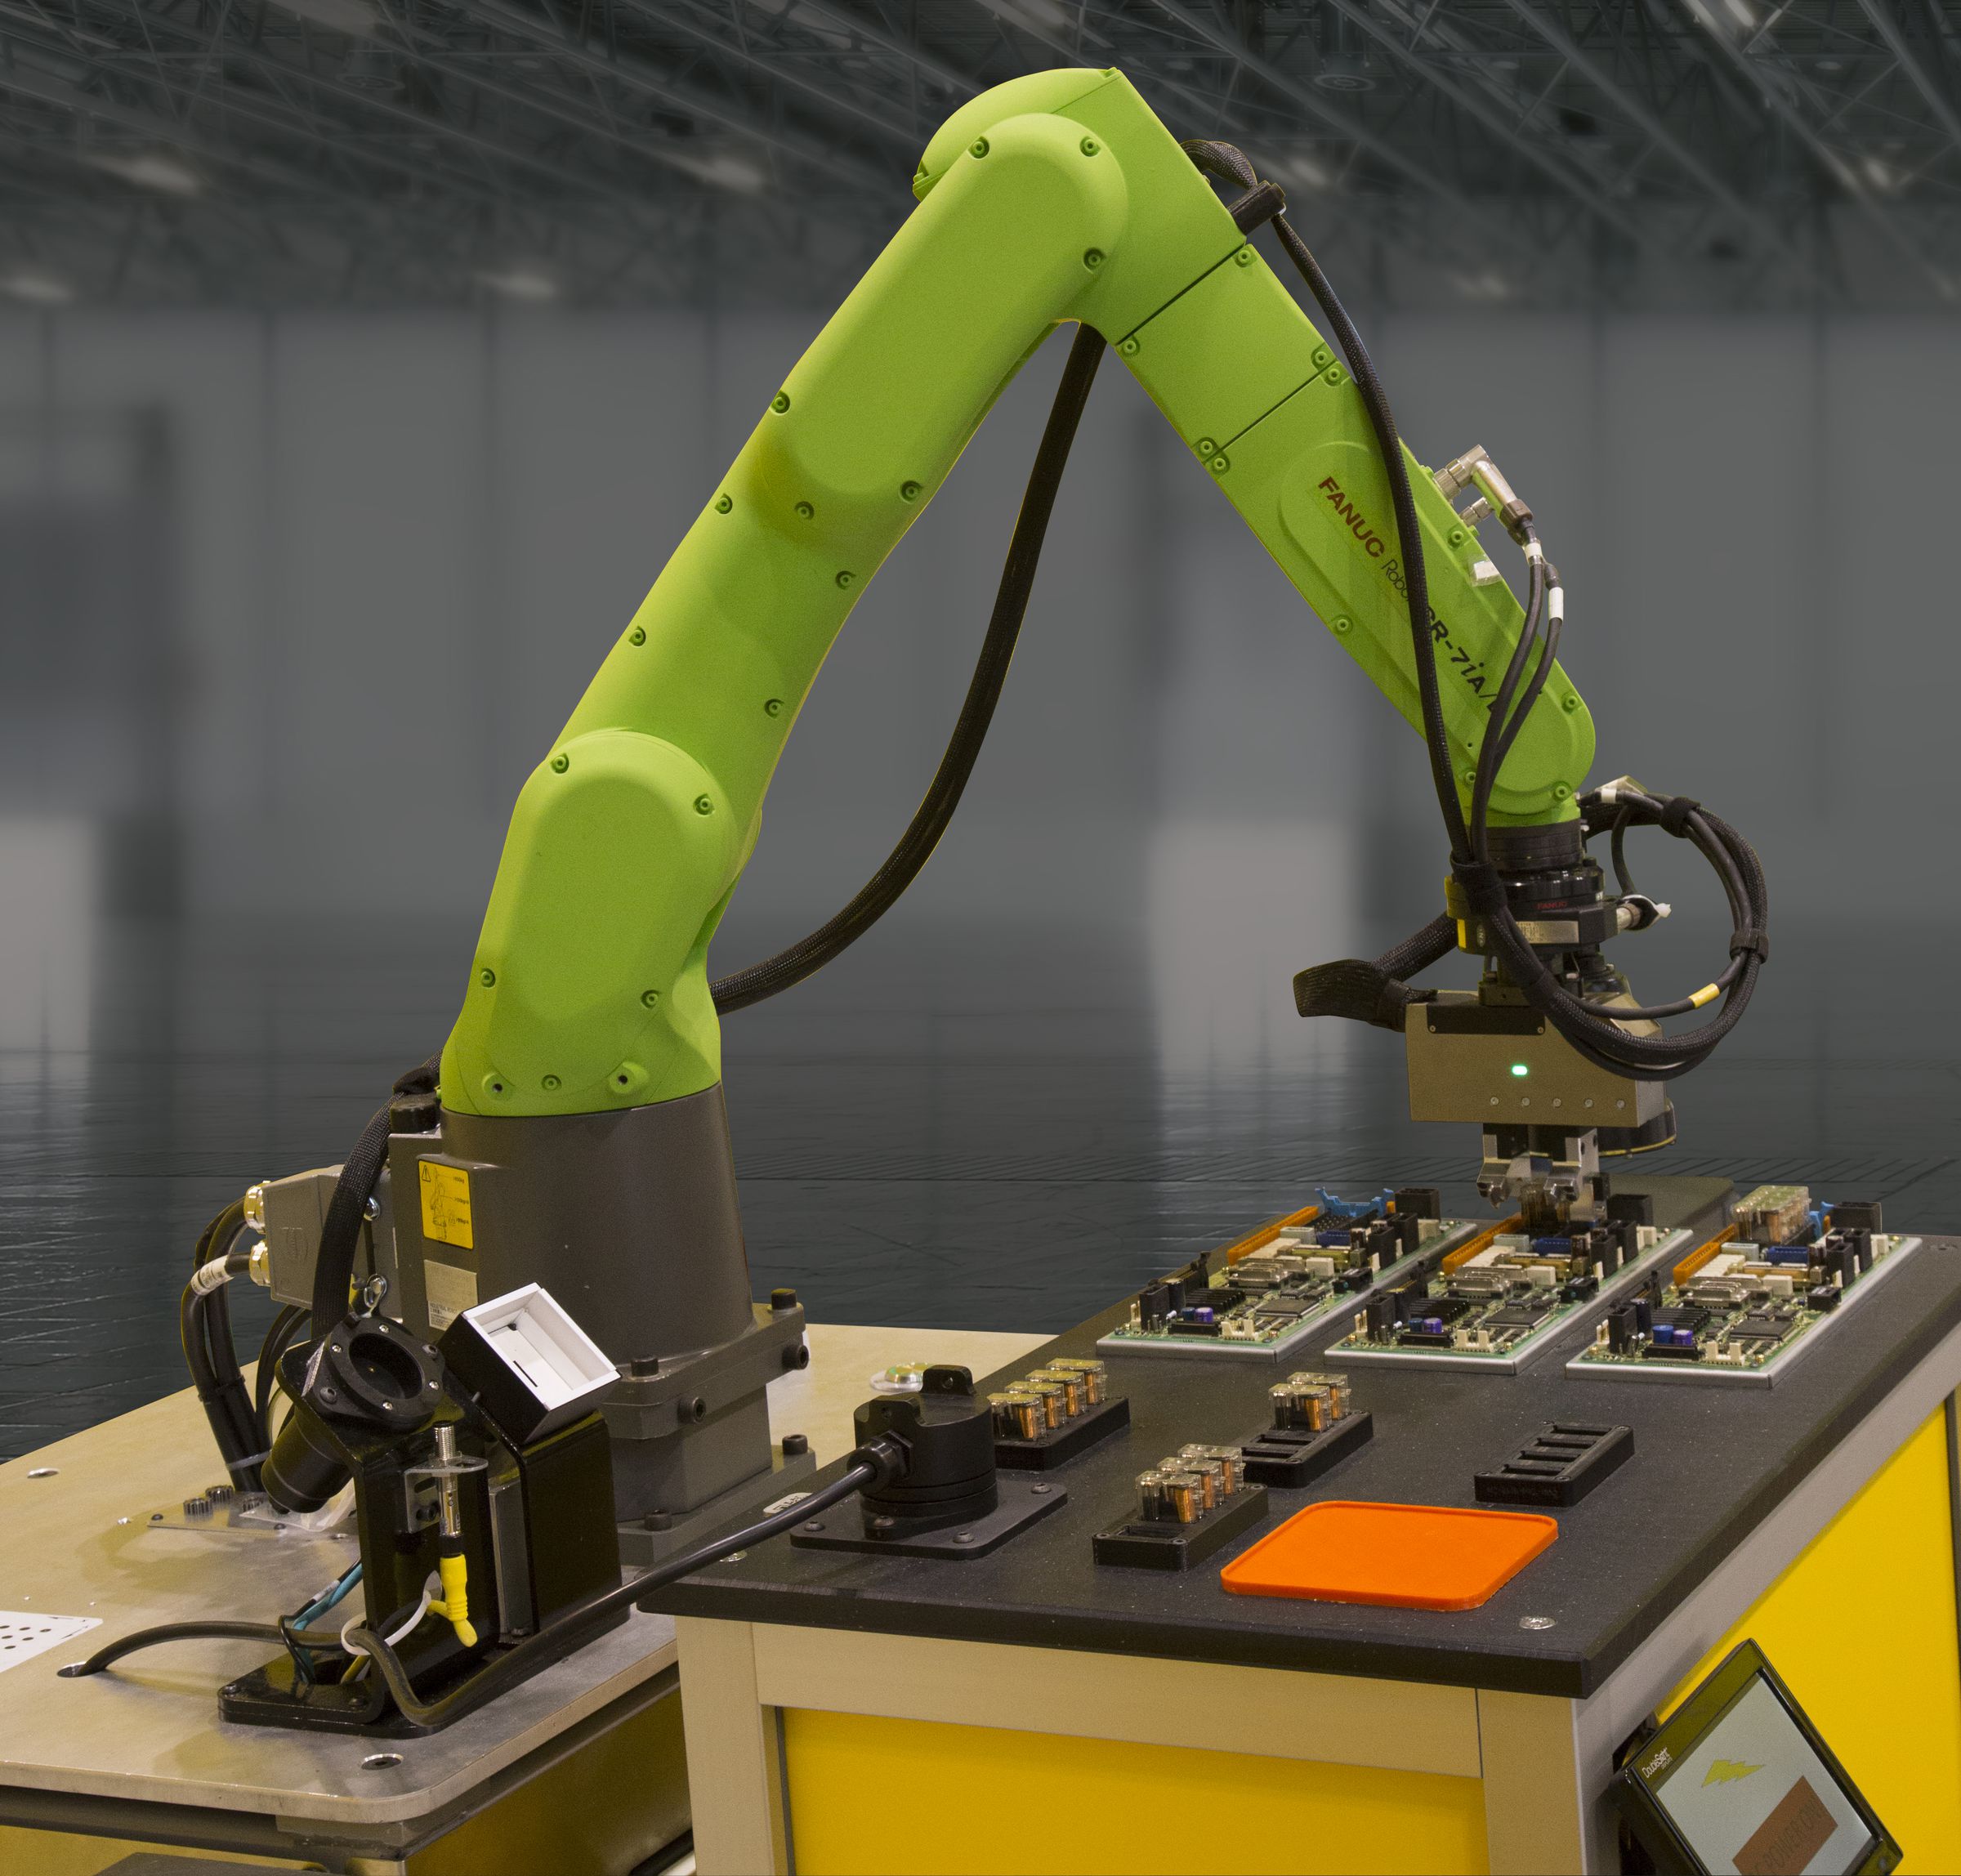 



Fanuc is Japanese robotics company that specializes industrial manufacturing, like the CR-4iA robitic arm used for gearbox and motor assembly. 